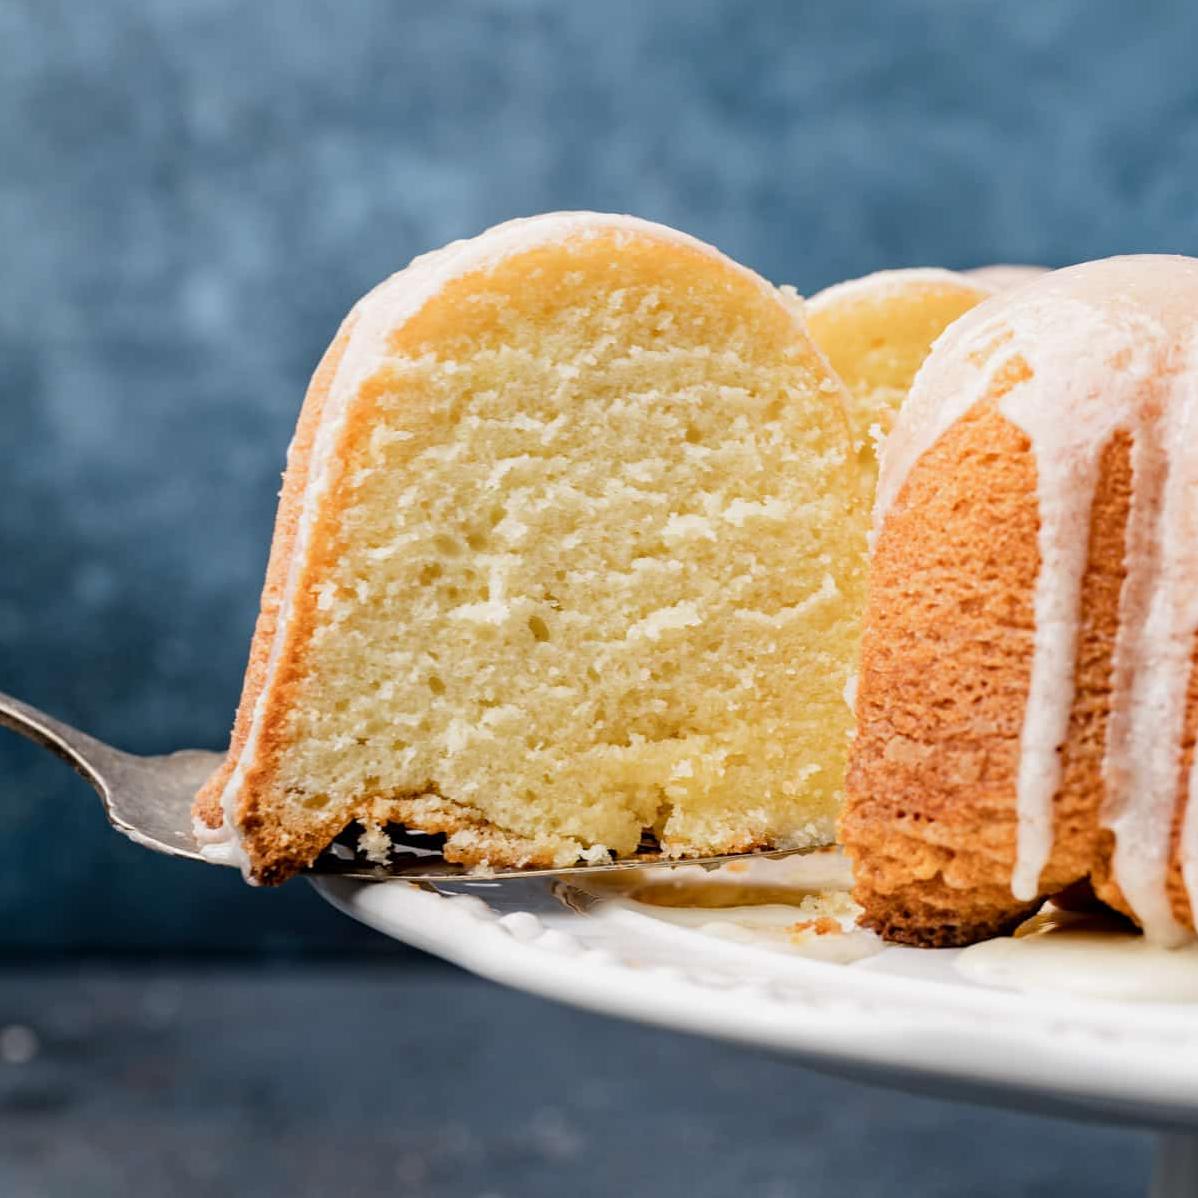  Take a bite of this Pound Cake and let it melt in your mouth, leaving behind the buttery richness and delicate crumb